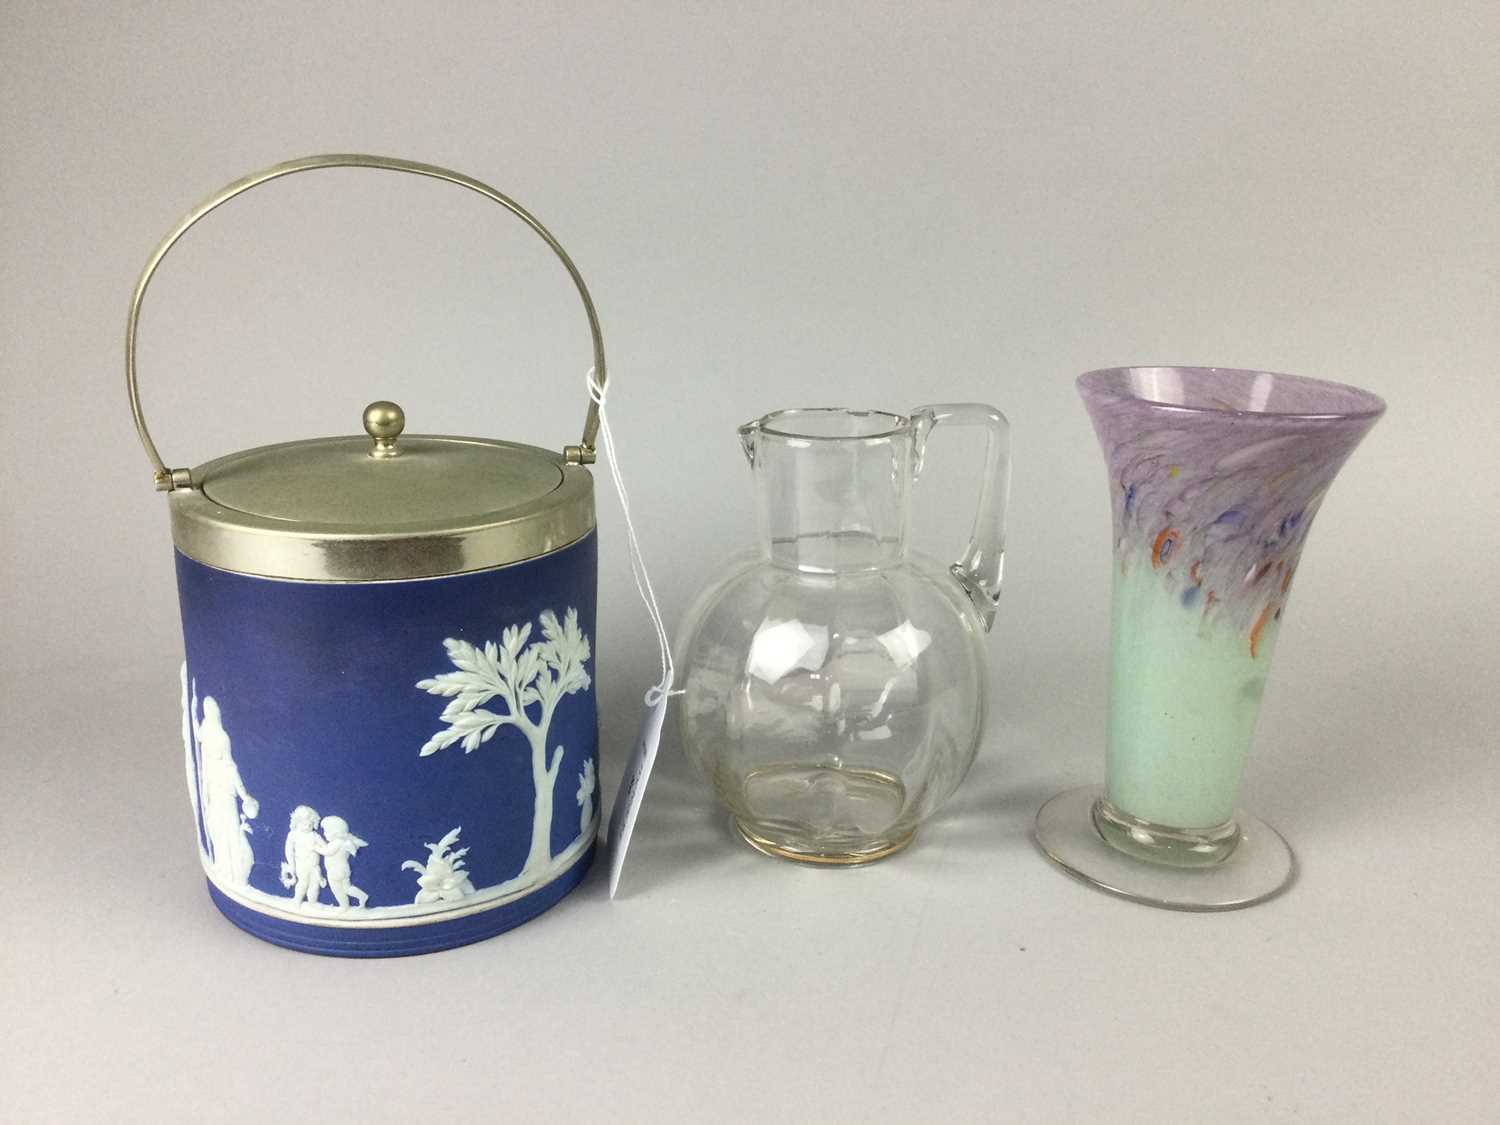 Lot 86 - A VICTORIAN MARY GREGORY ENAMELLED GLASS JUG, VASART GLASS AND A BISCUIT BARREL